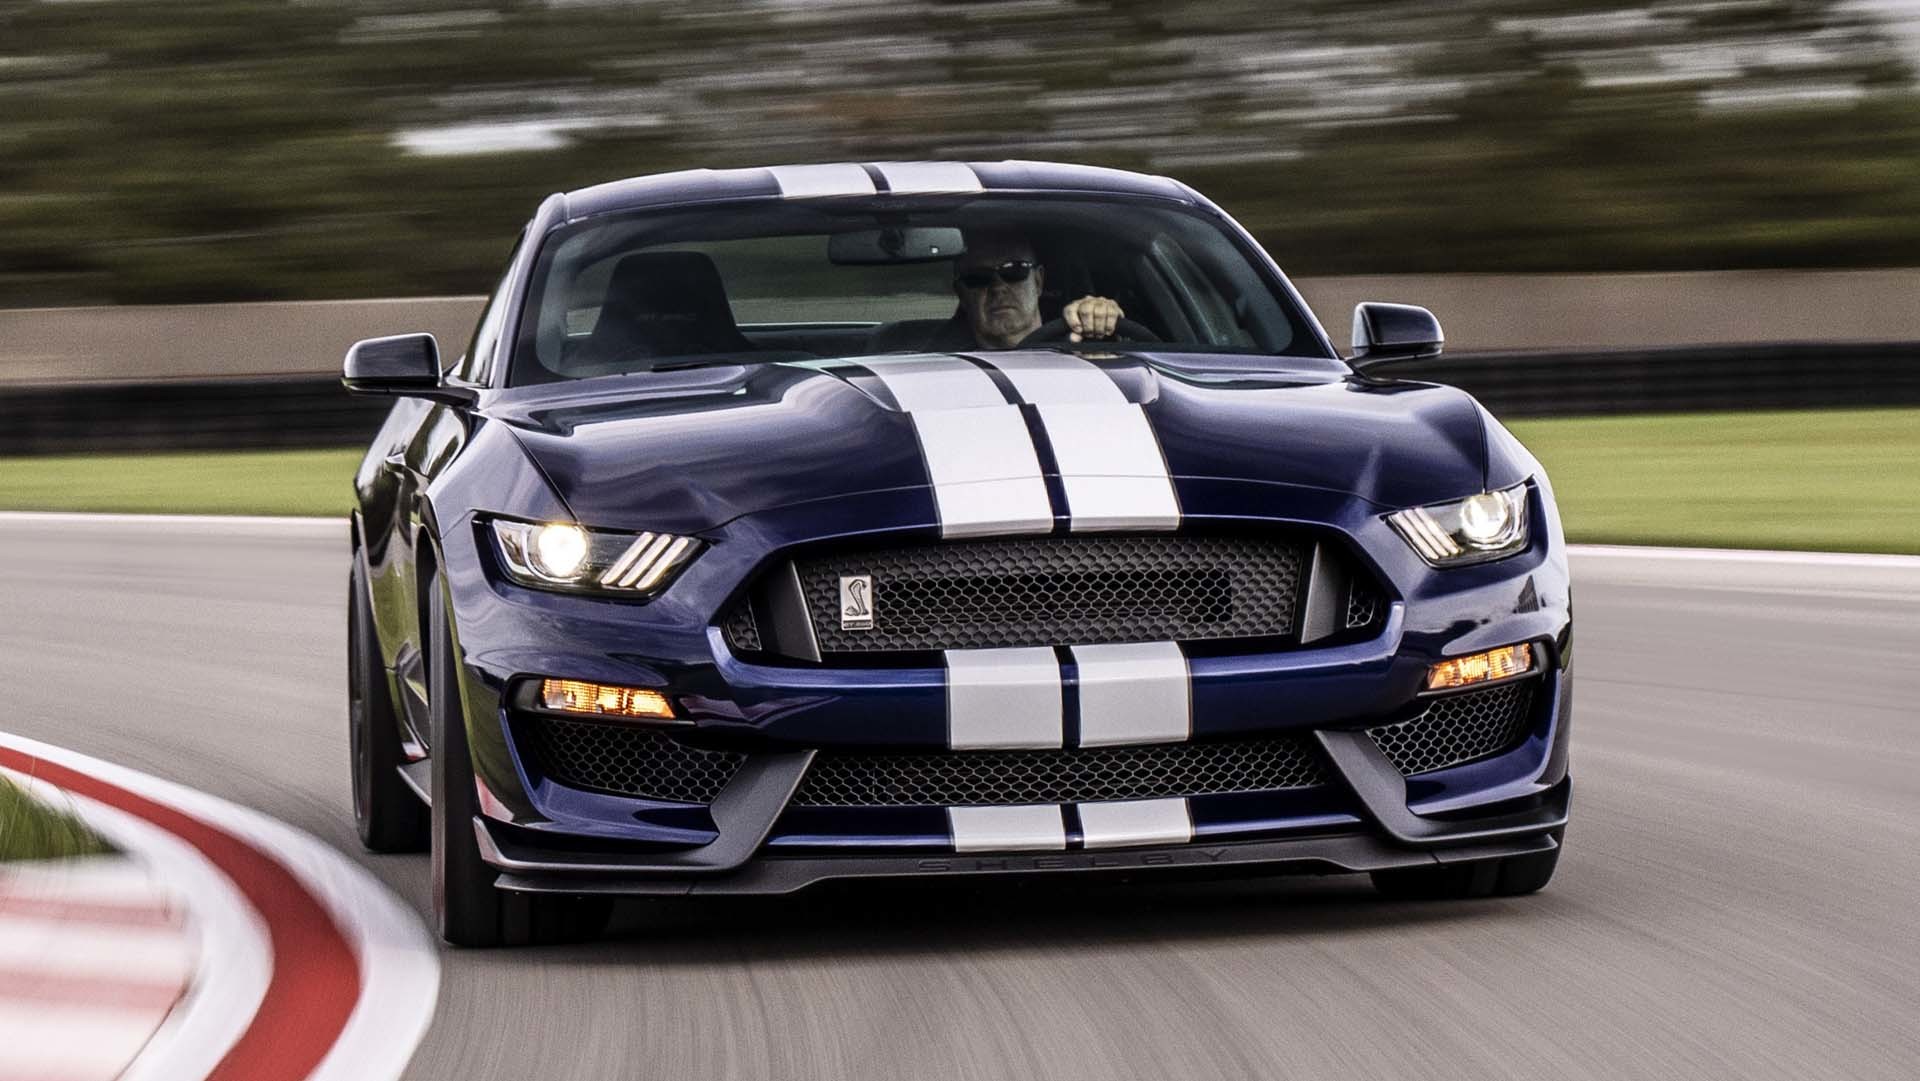 1920x1081 Top 2019 Ford Mustang Shelby Gt 350 Wallpaper